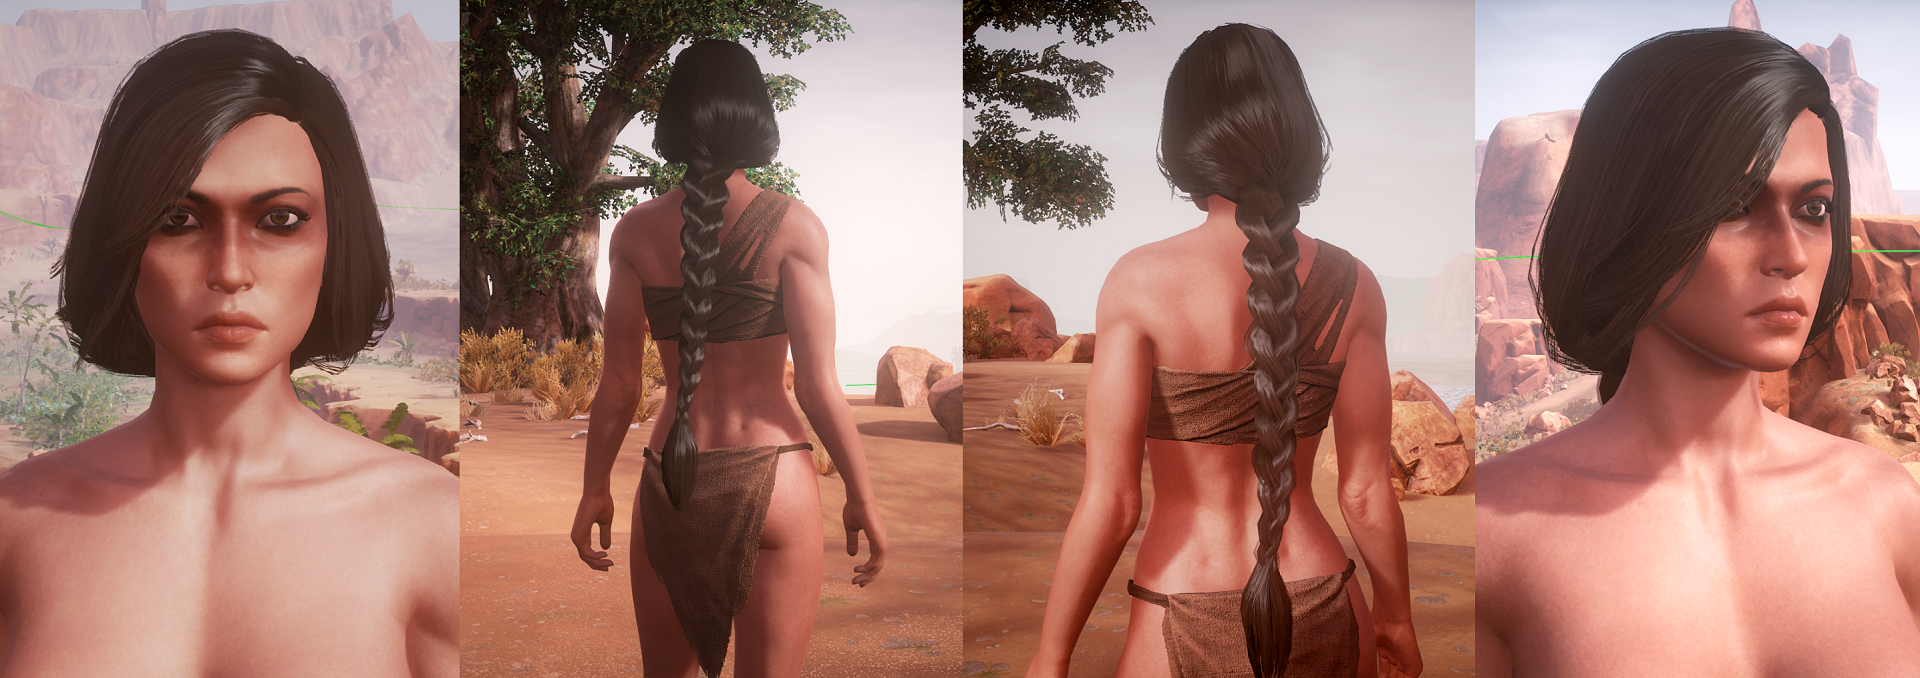 becky mccracken recommends nudity in conan exiles pic